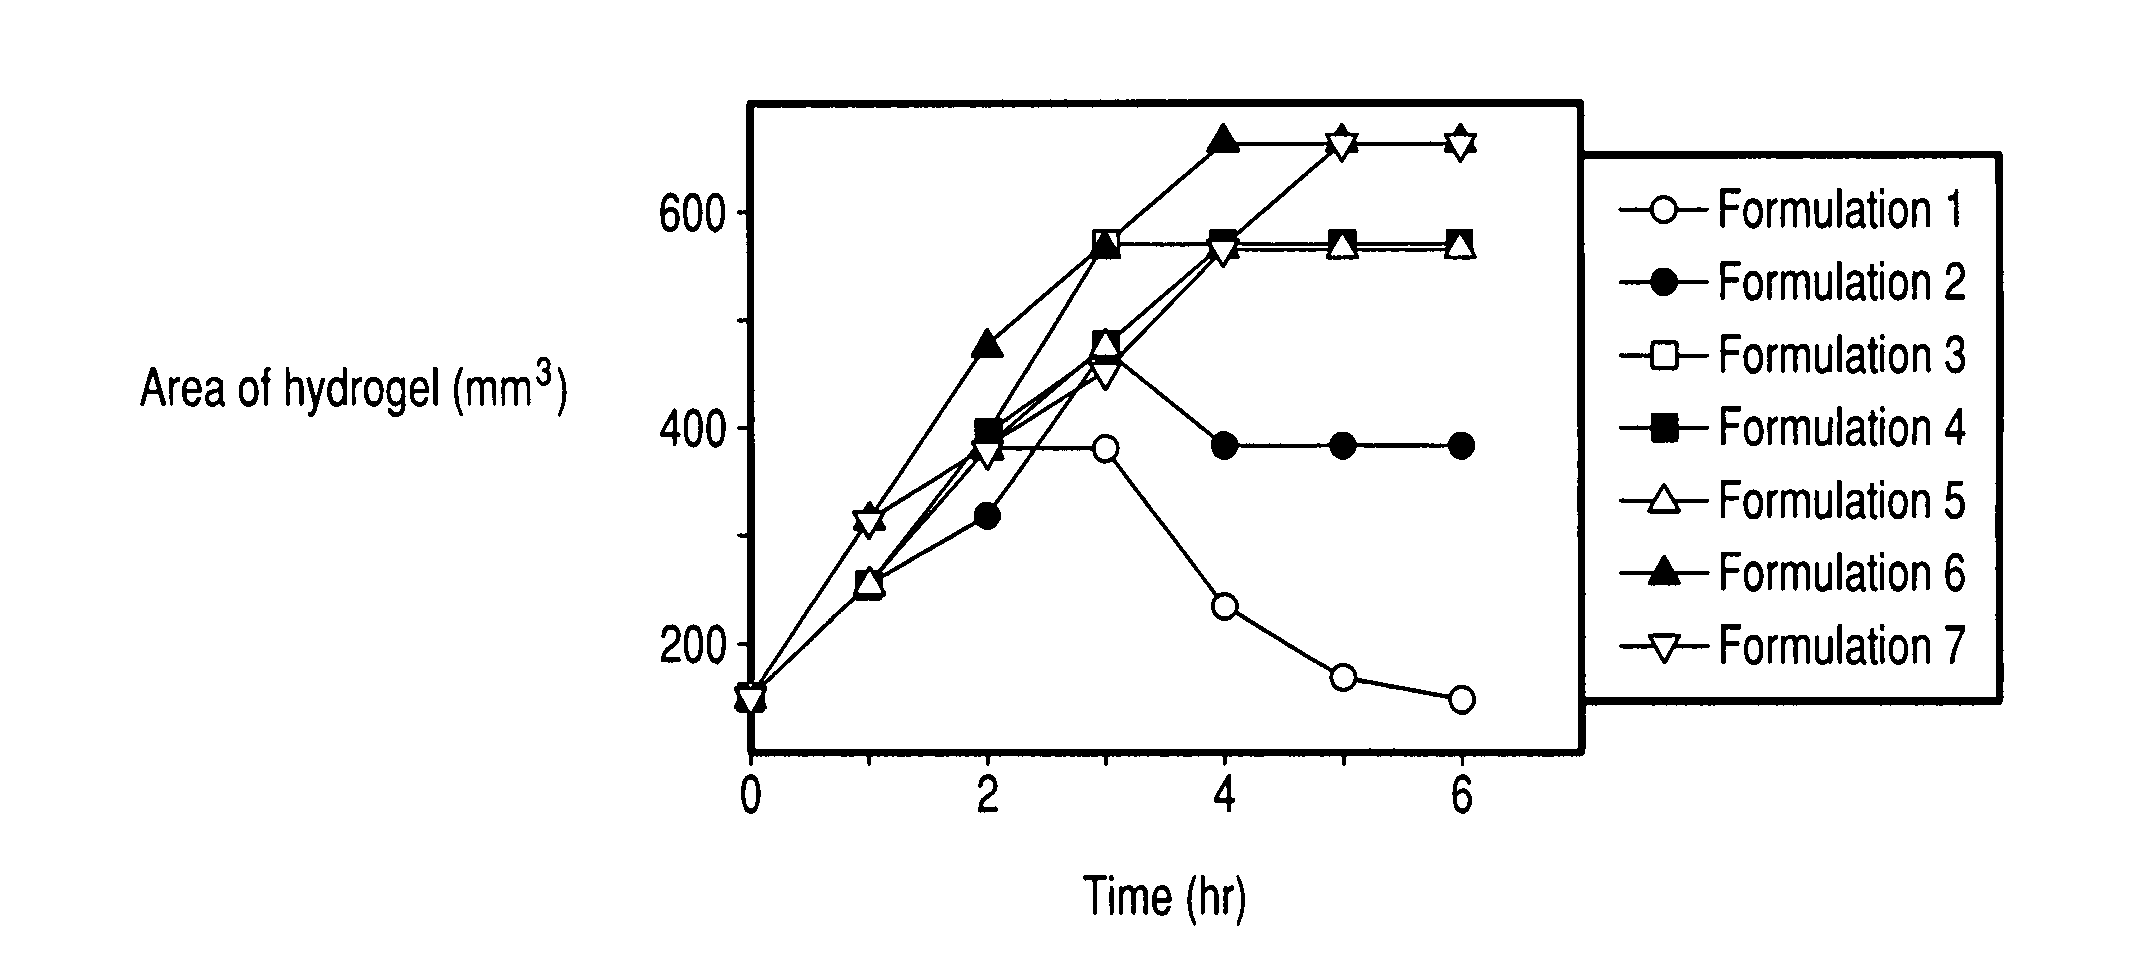 Controlled release formulations of enzymes, microorganisms, and antibodies with mucoadhesive polymers